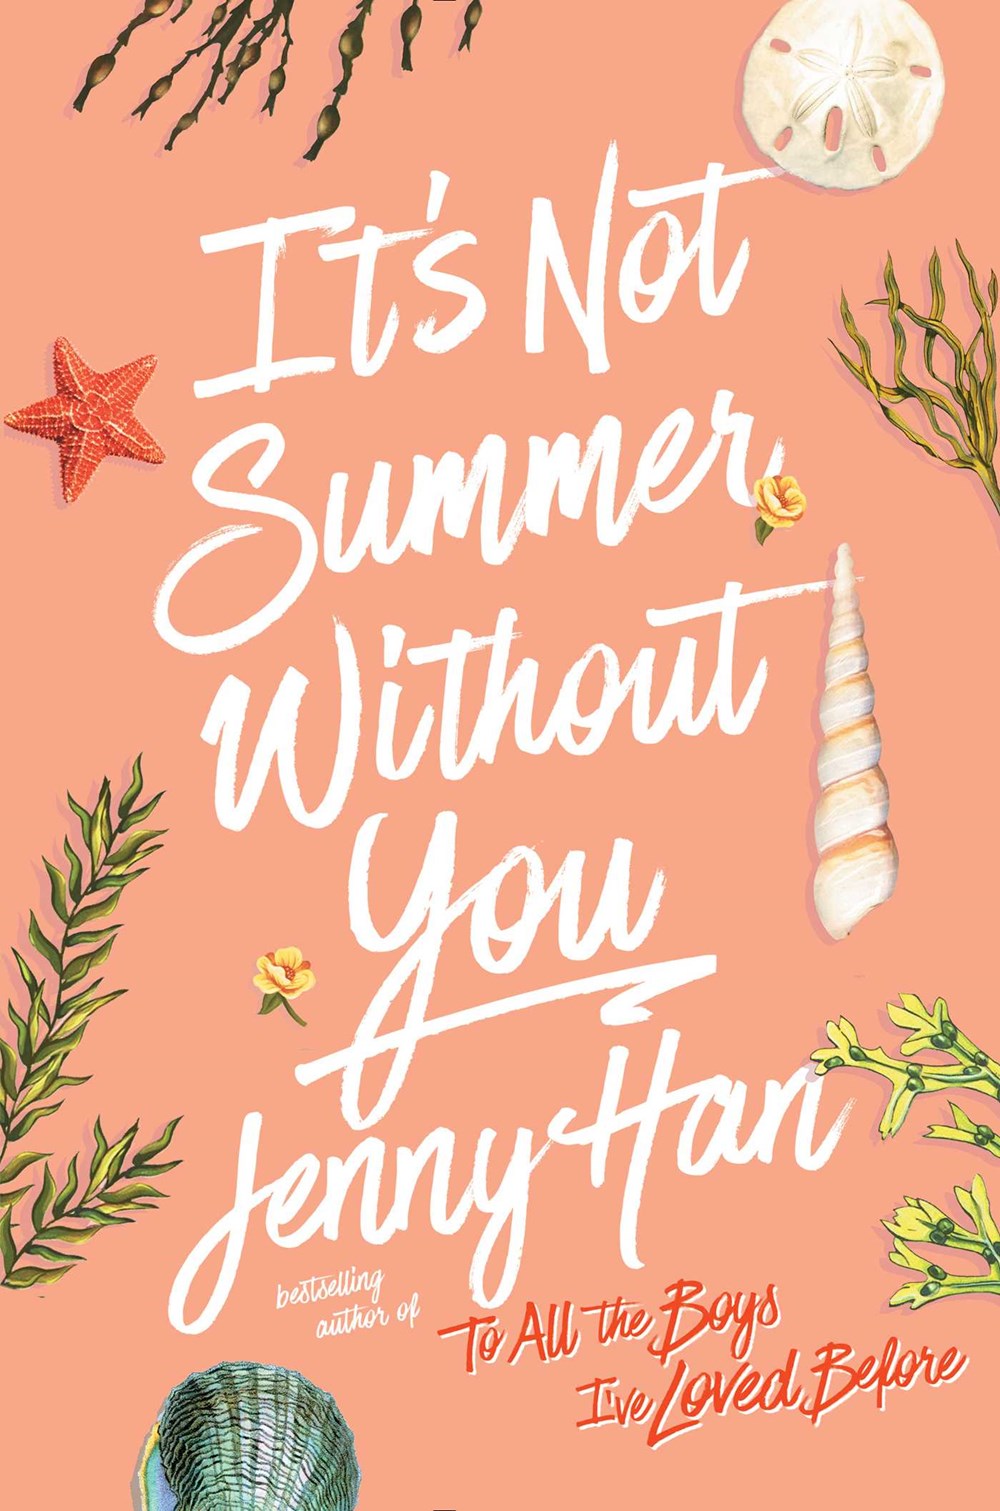 Its-Not-Summer-Without-You